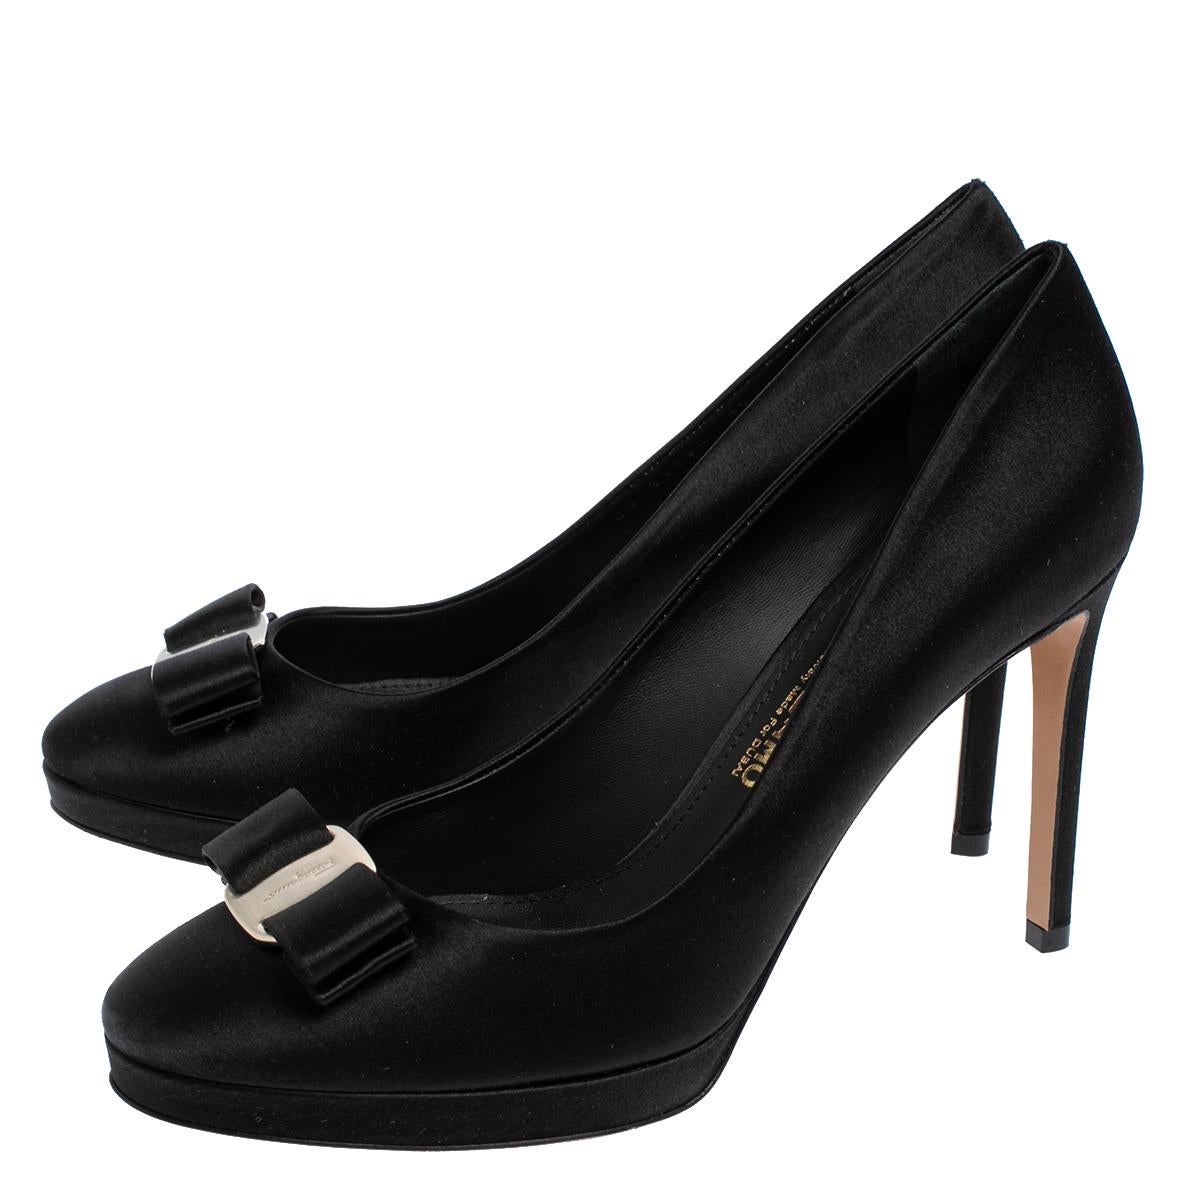 These Salvatore Ferragamo pumps are subtly stylish. With a color like black, this pair is versatile and can be worn on a long workday or at a formal event. Crafted from satin, these Osimoglit pumps are a classic with the Vara bow on the vamps, and